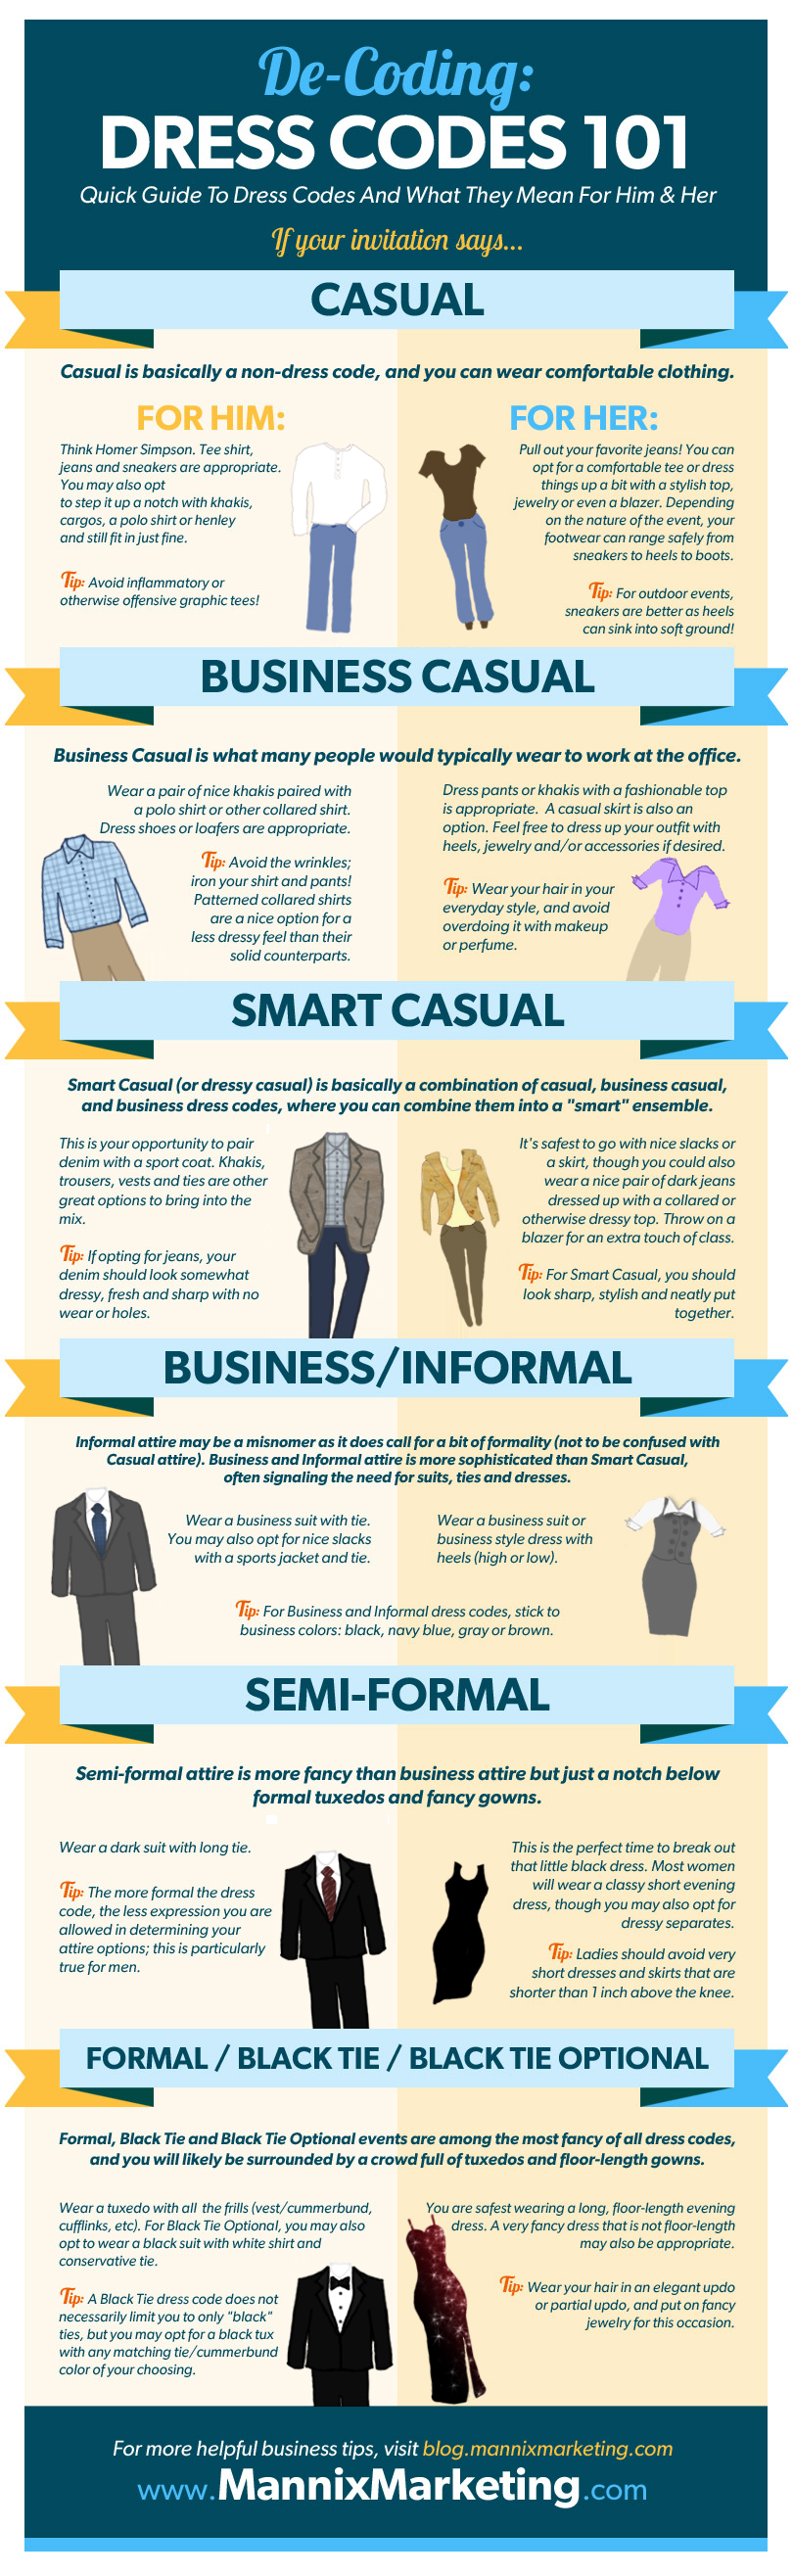 Formal vs Semi-Formal: What's the Difference? - Event Rentals by Hicks